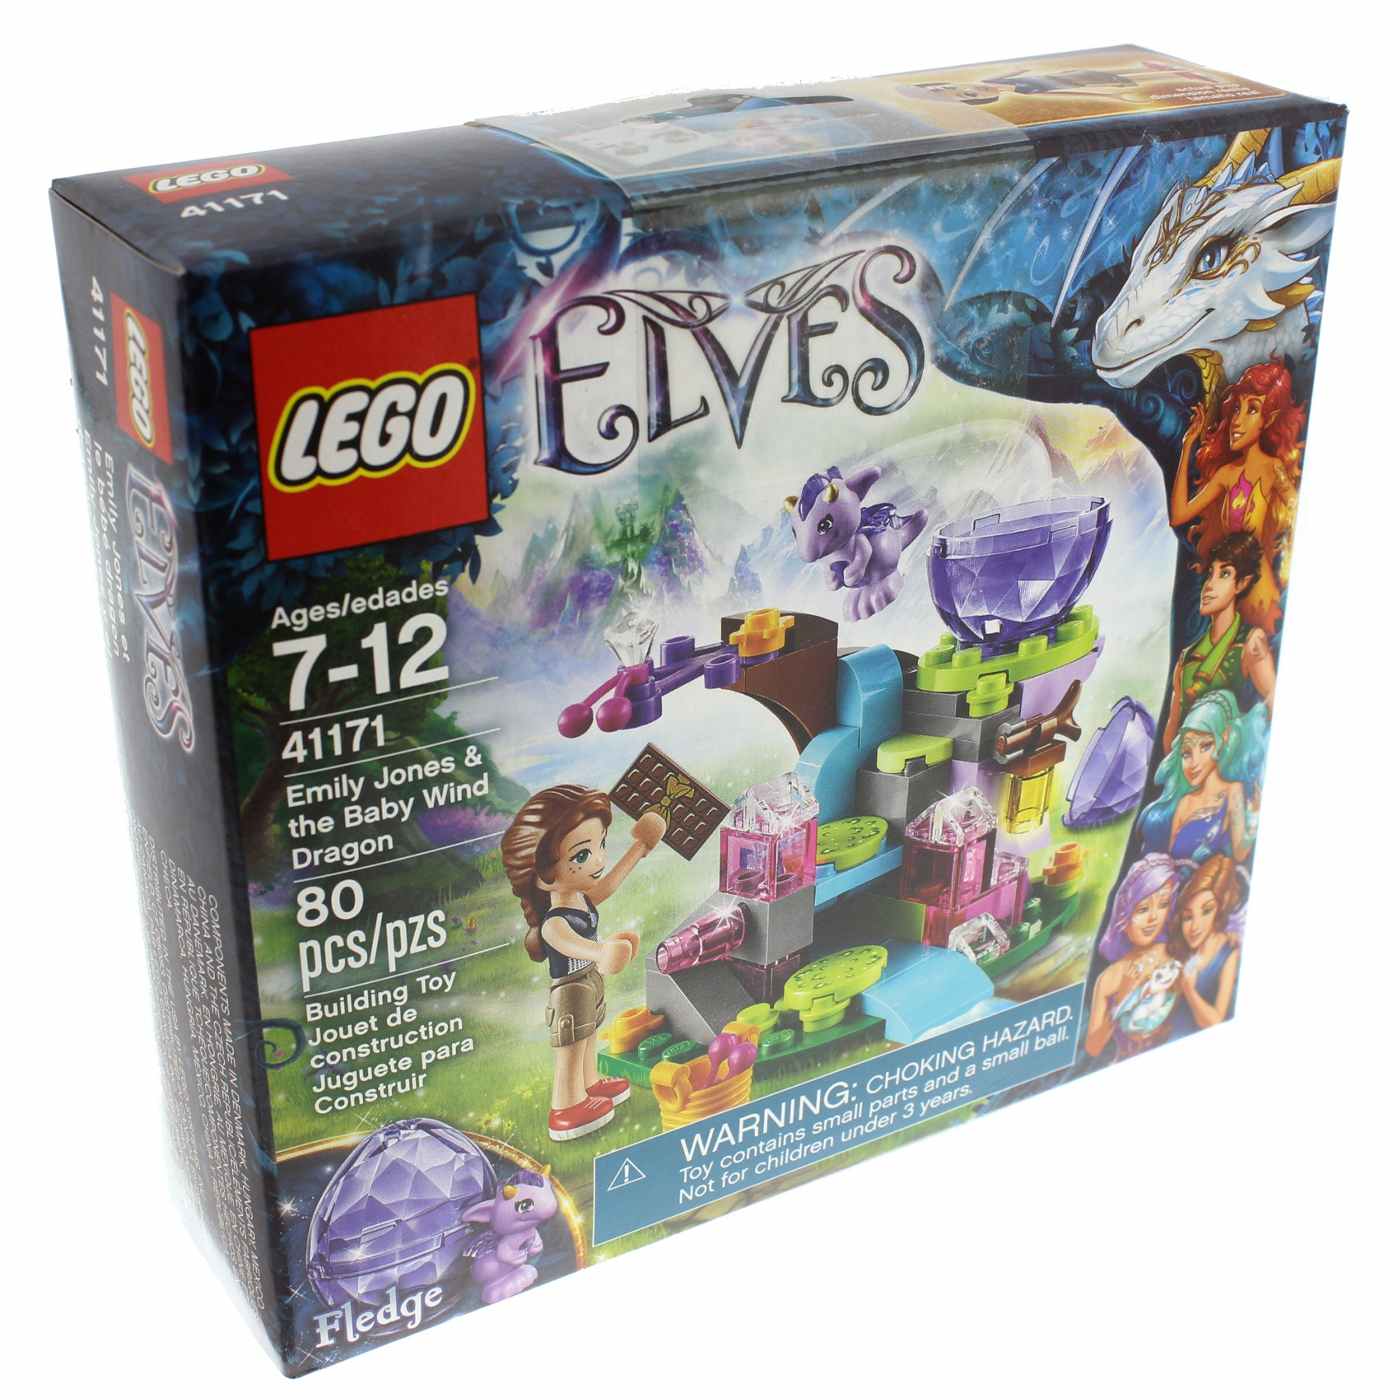 LEGO Elves Jones & the Baby Wind Dragon - Shop Playsets at H-E-B